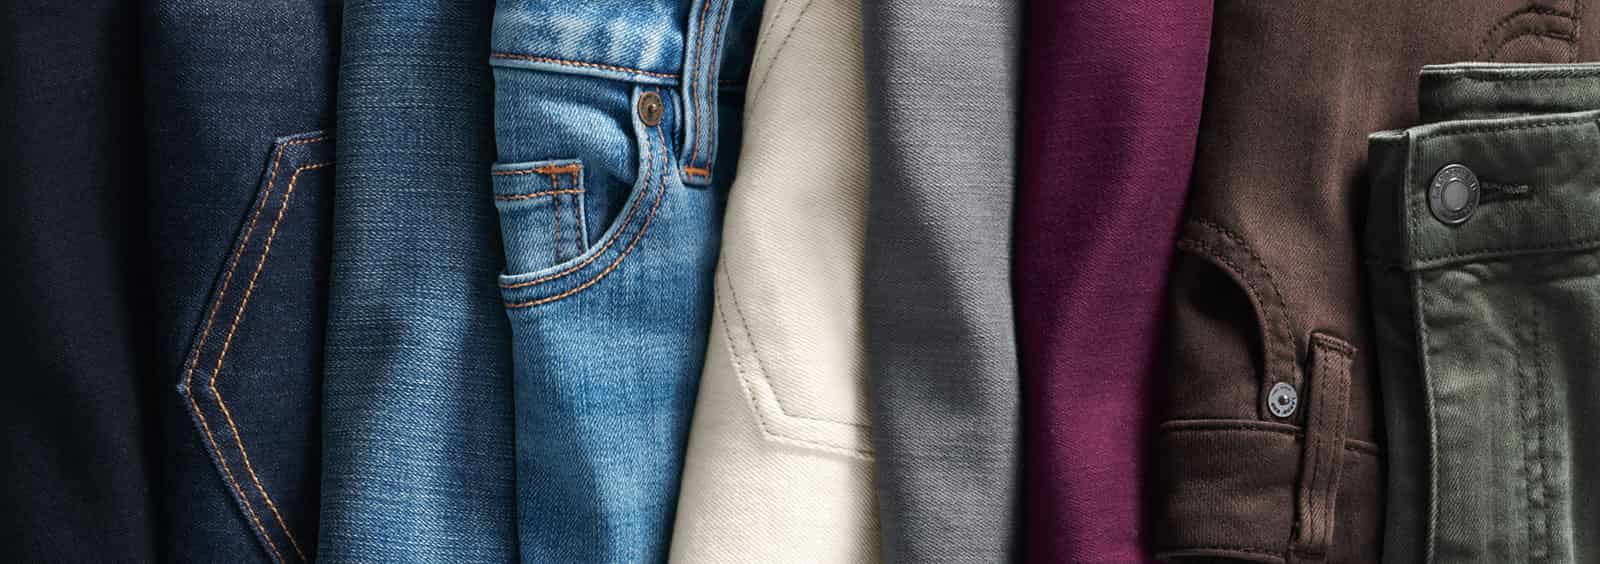 The Elements of Jeans: What to Look for in New Jeans